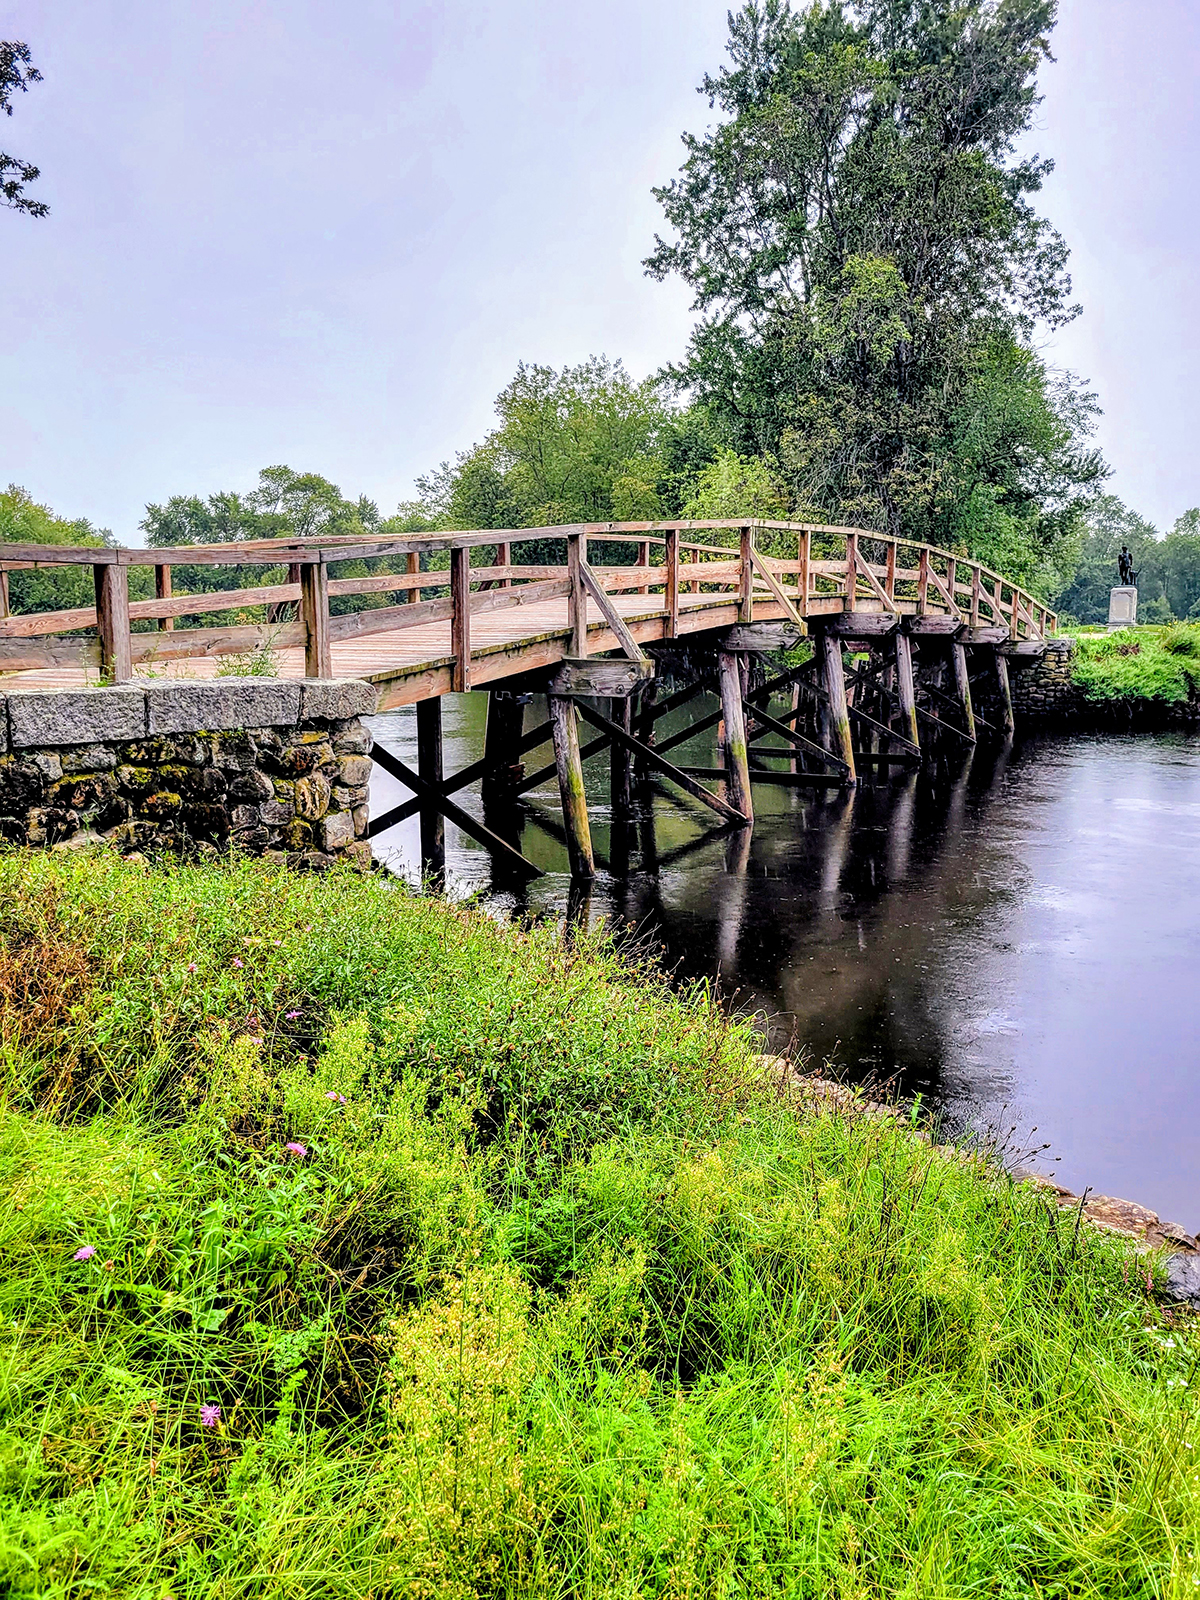 The Old North Bridge at Minuteman National Park in Concord, MA